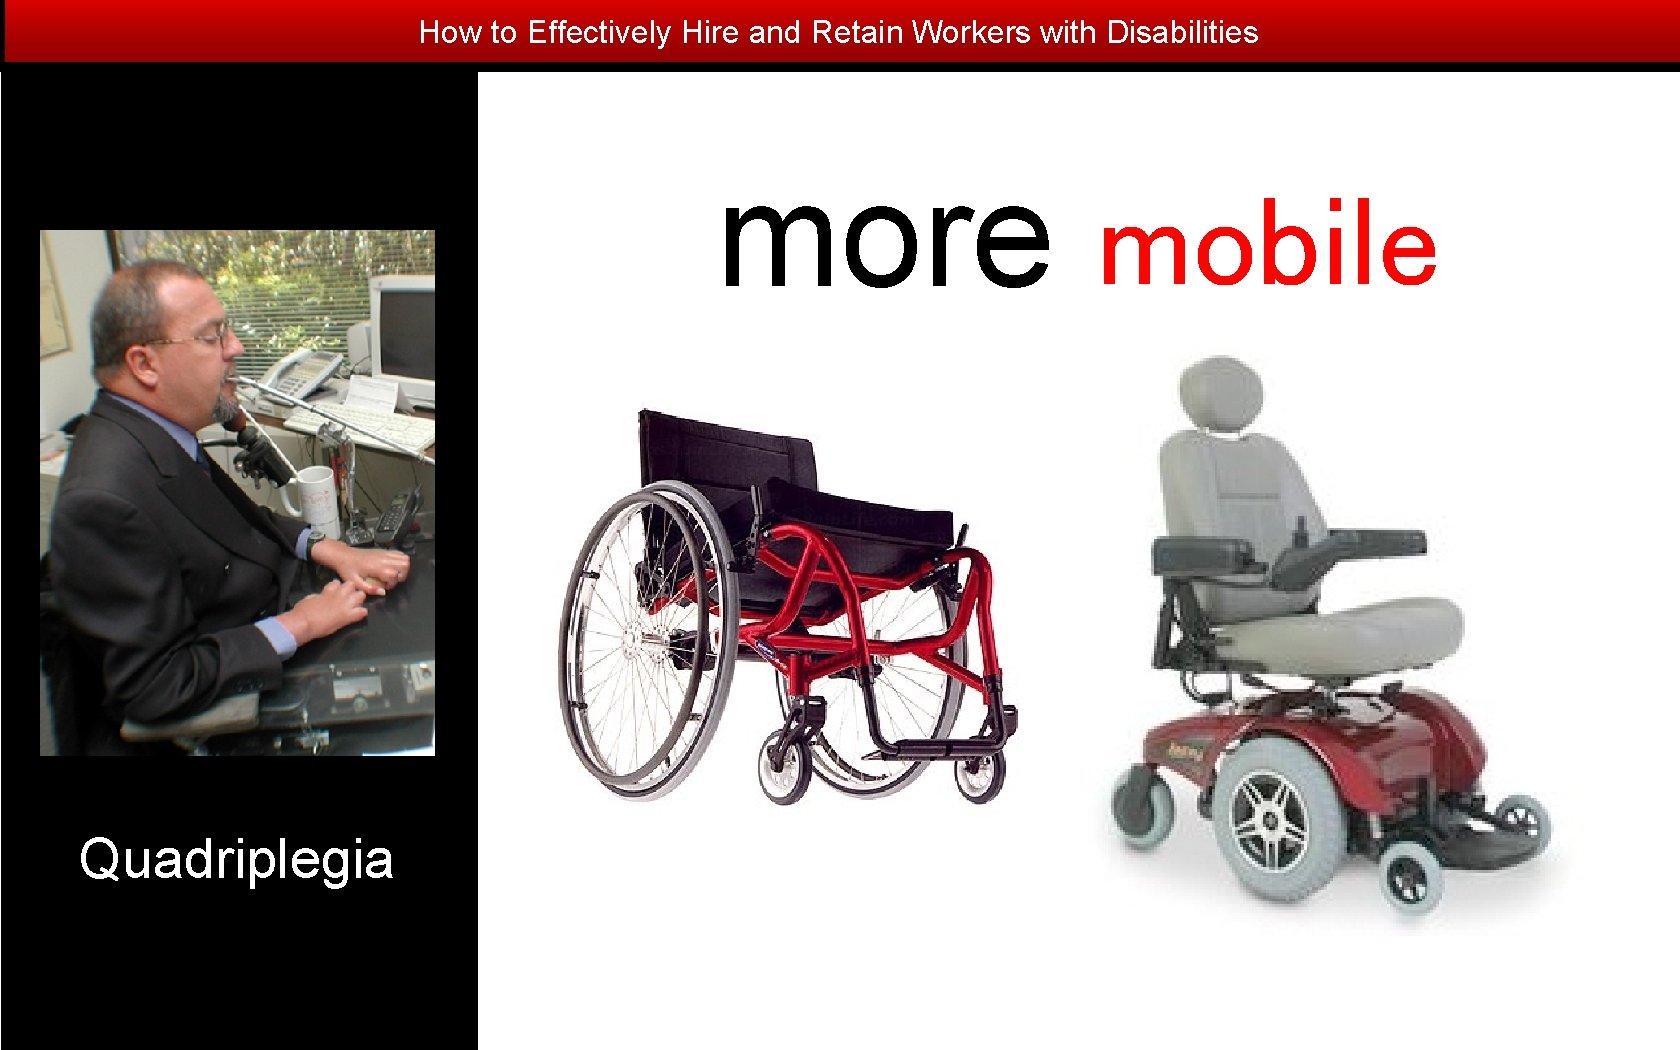 How to Effectively Hire and Retain Workers with Disabilities more mobile Quadriplegia 